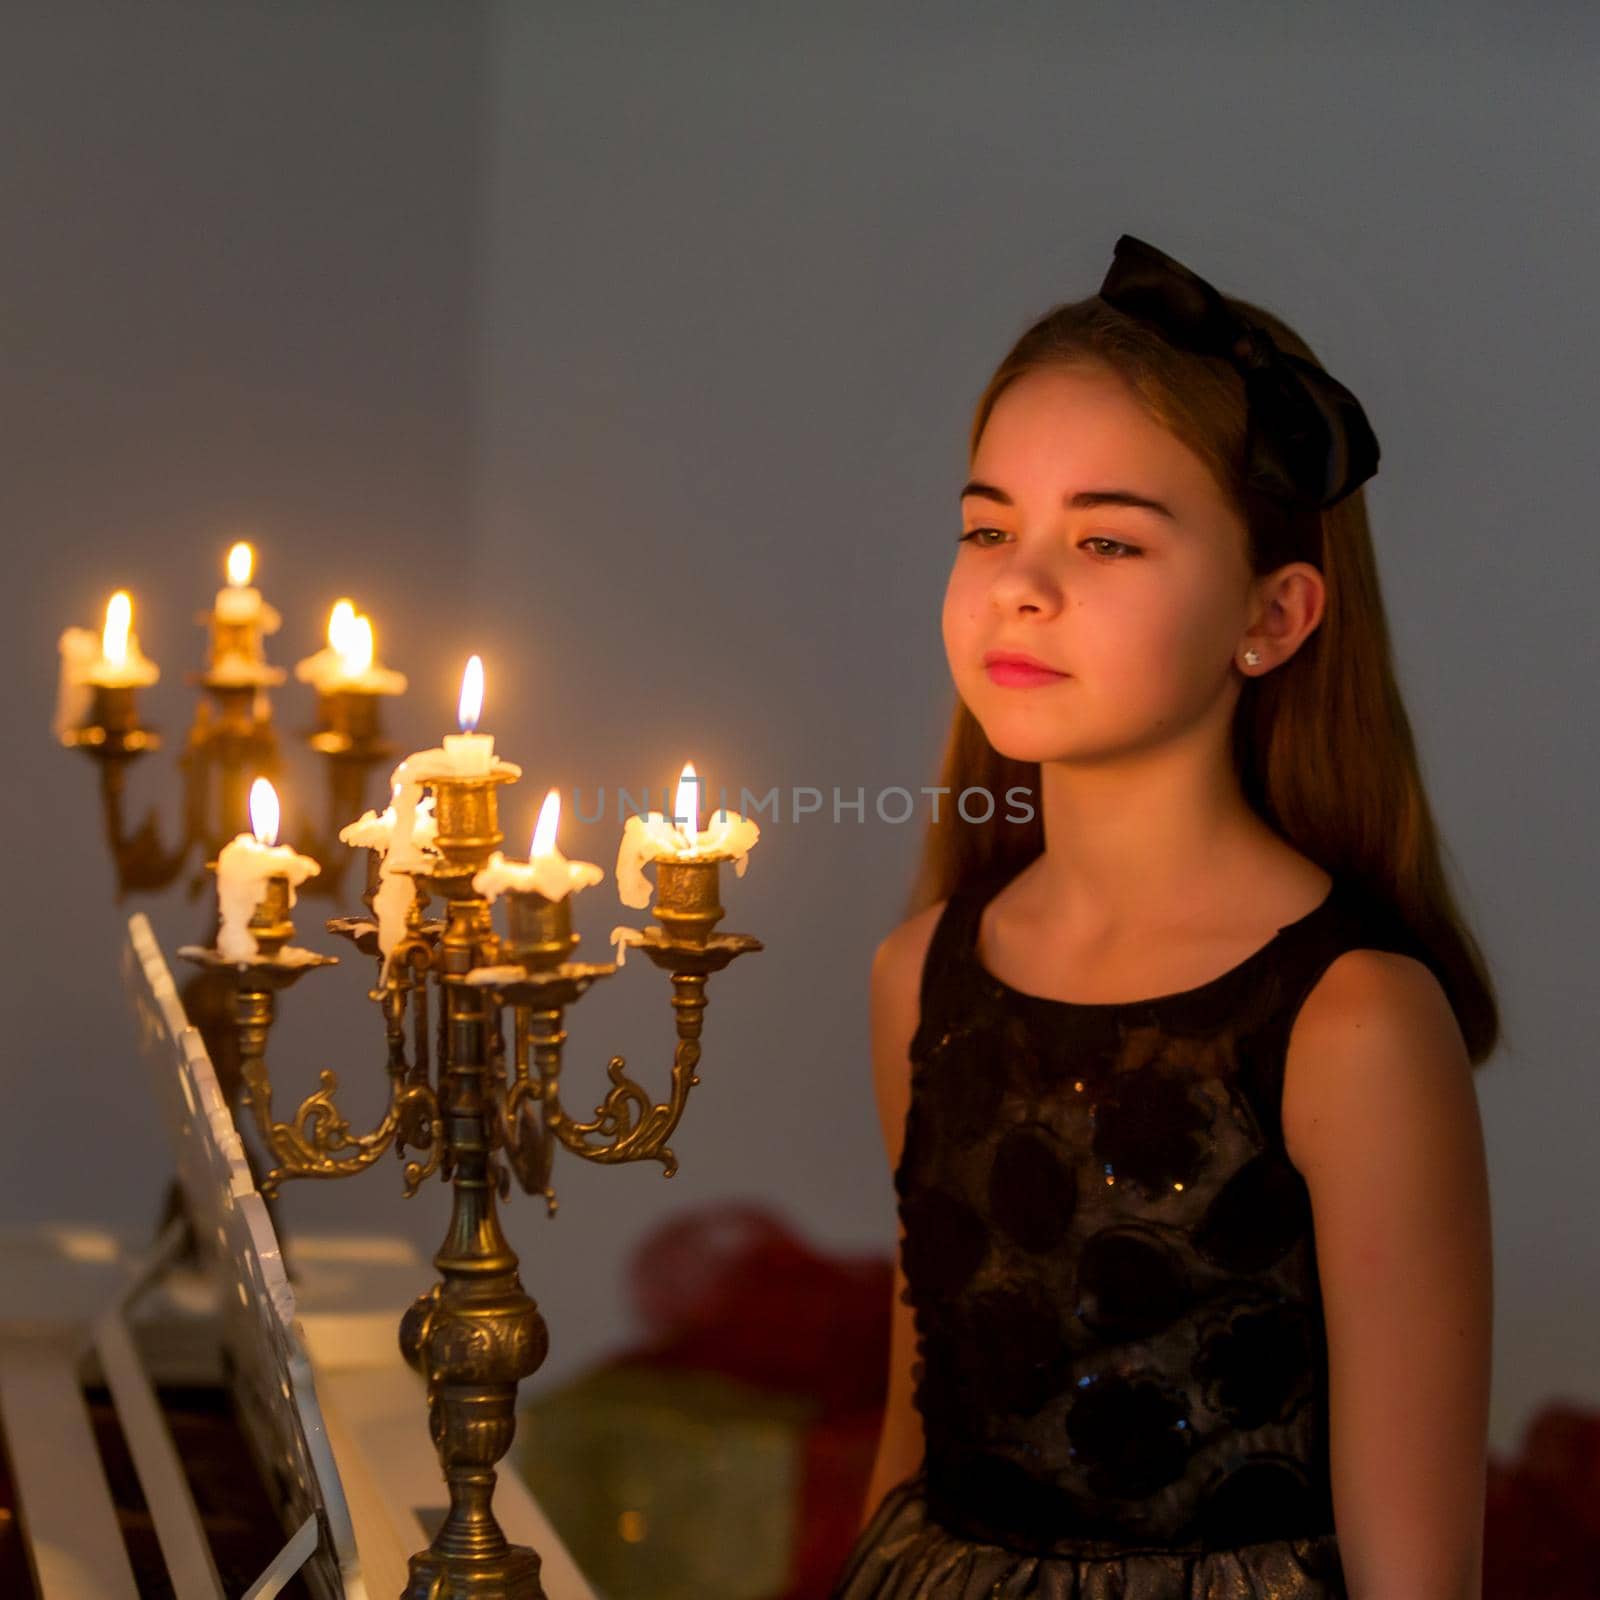 A little girl in a dark room by candlelight. by kolesnikov_studio